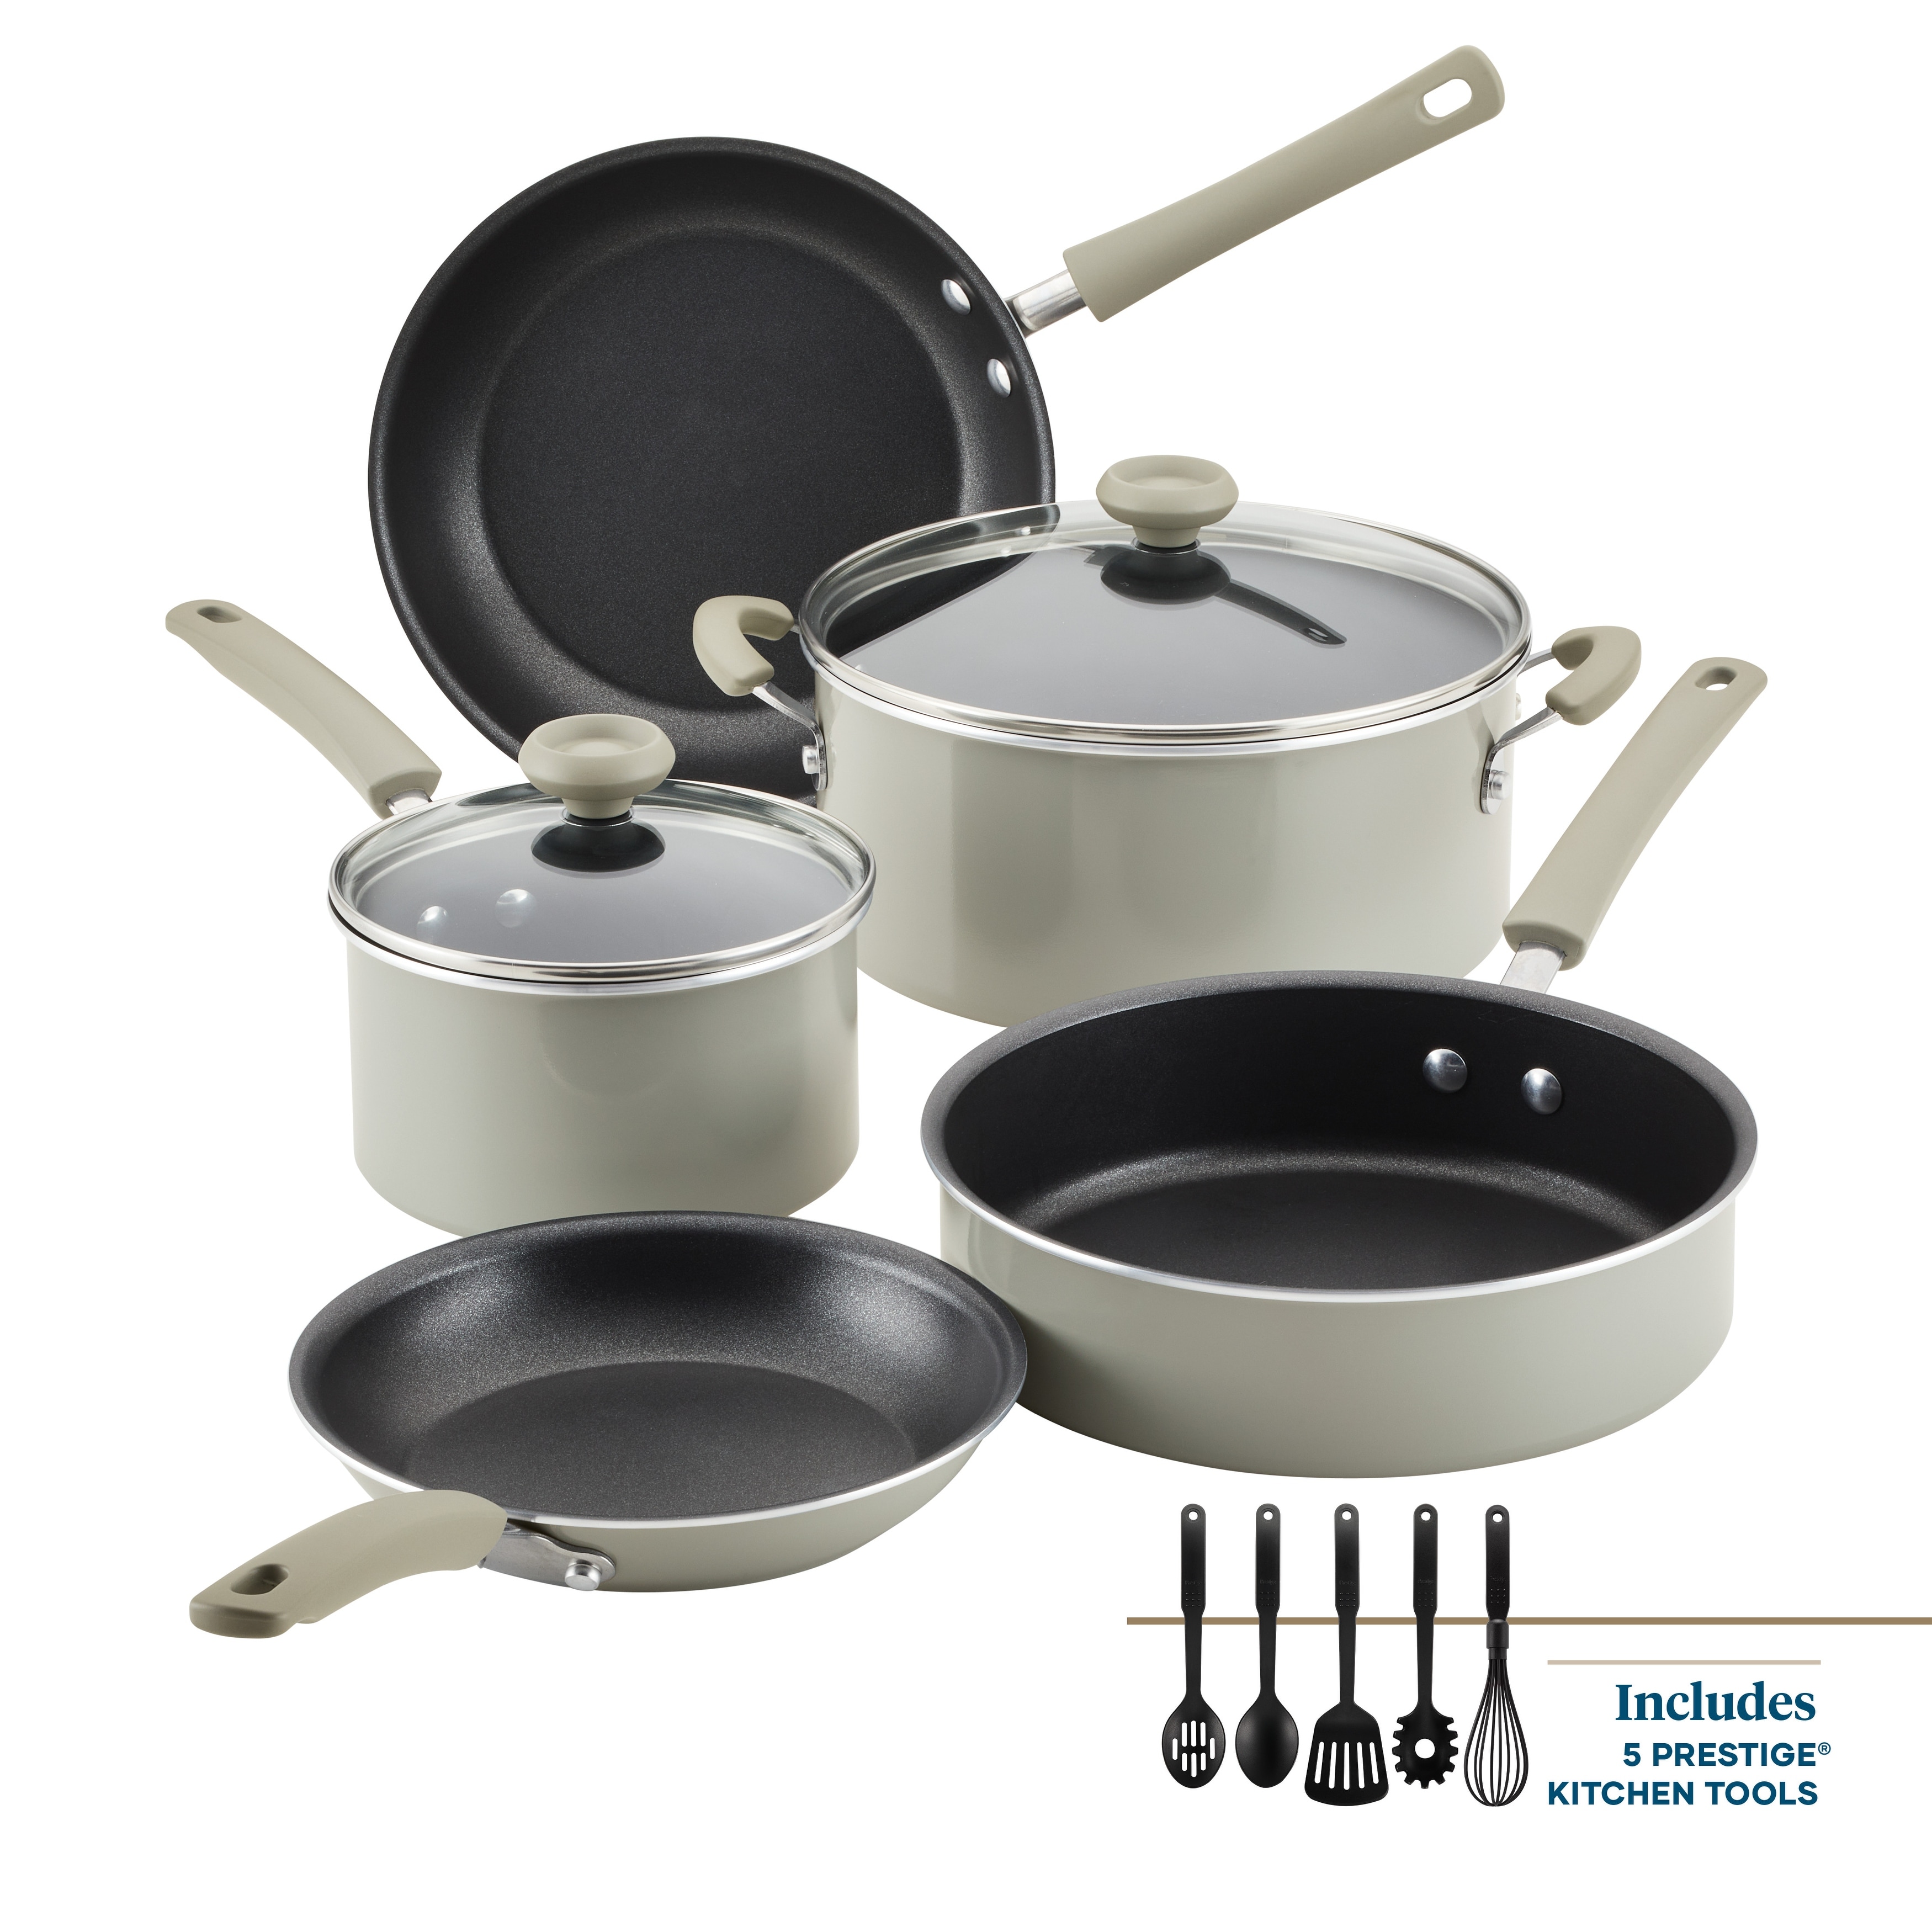 https://ak1.ostkcdn.com/images/products/is/images/direct/0338cc914b7f54084512c586e4ddc7f611710f1b/Farberware-DuraStrong-Nonstick-Cookware-Pots-and-Pans-Set%2C-12-Piece%2C-Gray.jpg